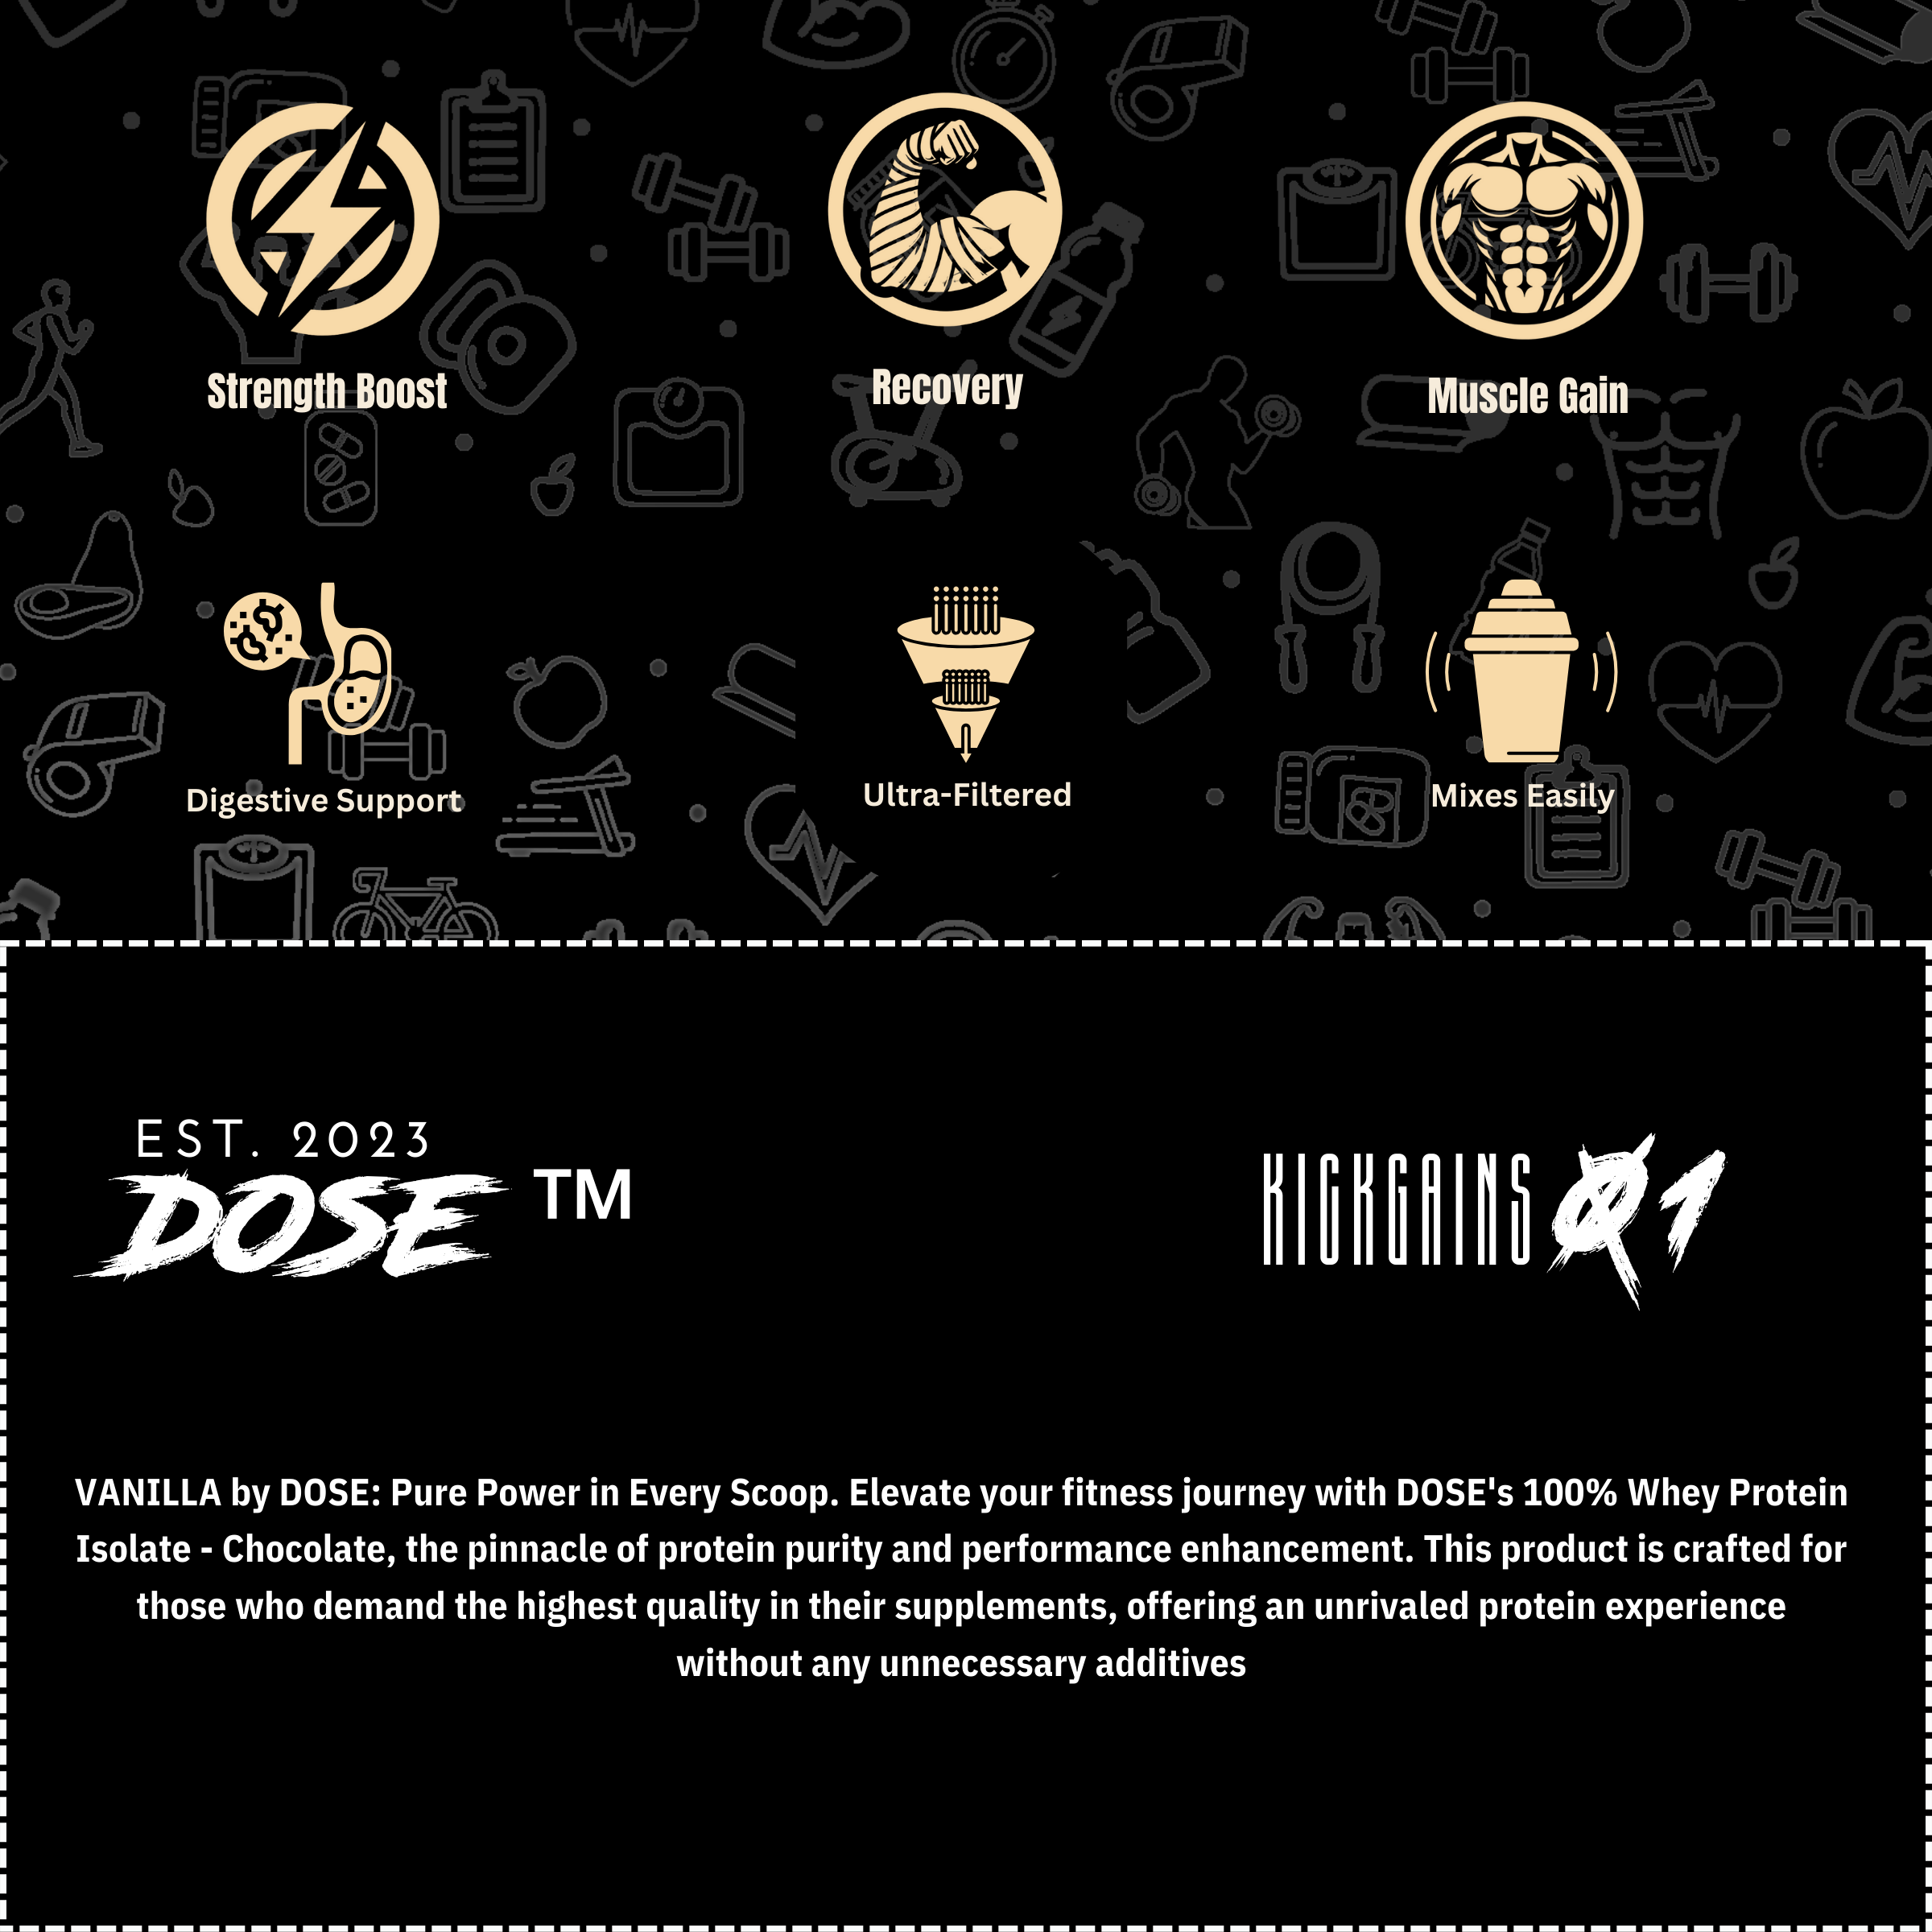 Dose Fuel Vanilla Whey Protein Benefits - Strength Boost, Recovery, Muscle Gain, Digestive Support, Ultra-Filtered, Mixes Easily. Pure Power in Every Scoop for Maximum Performance